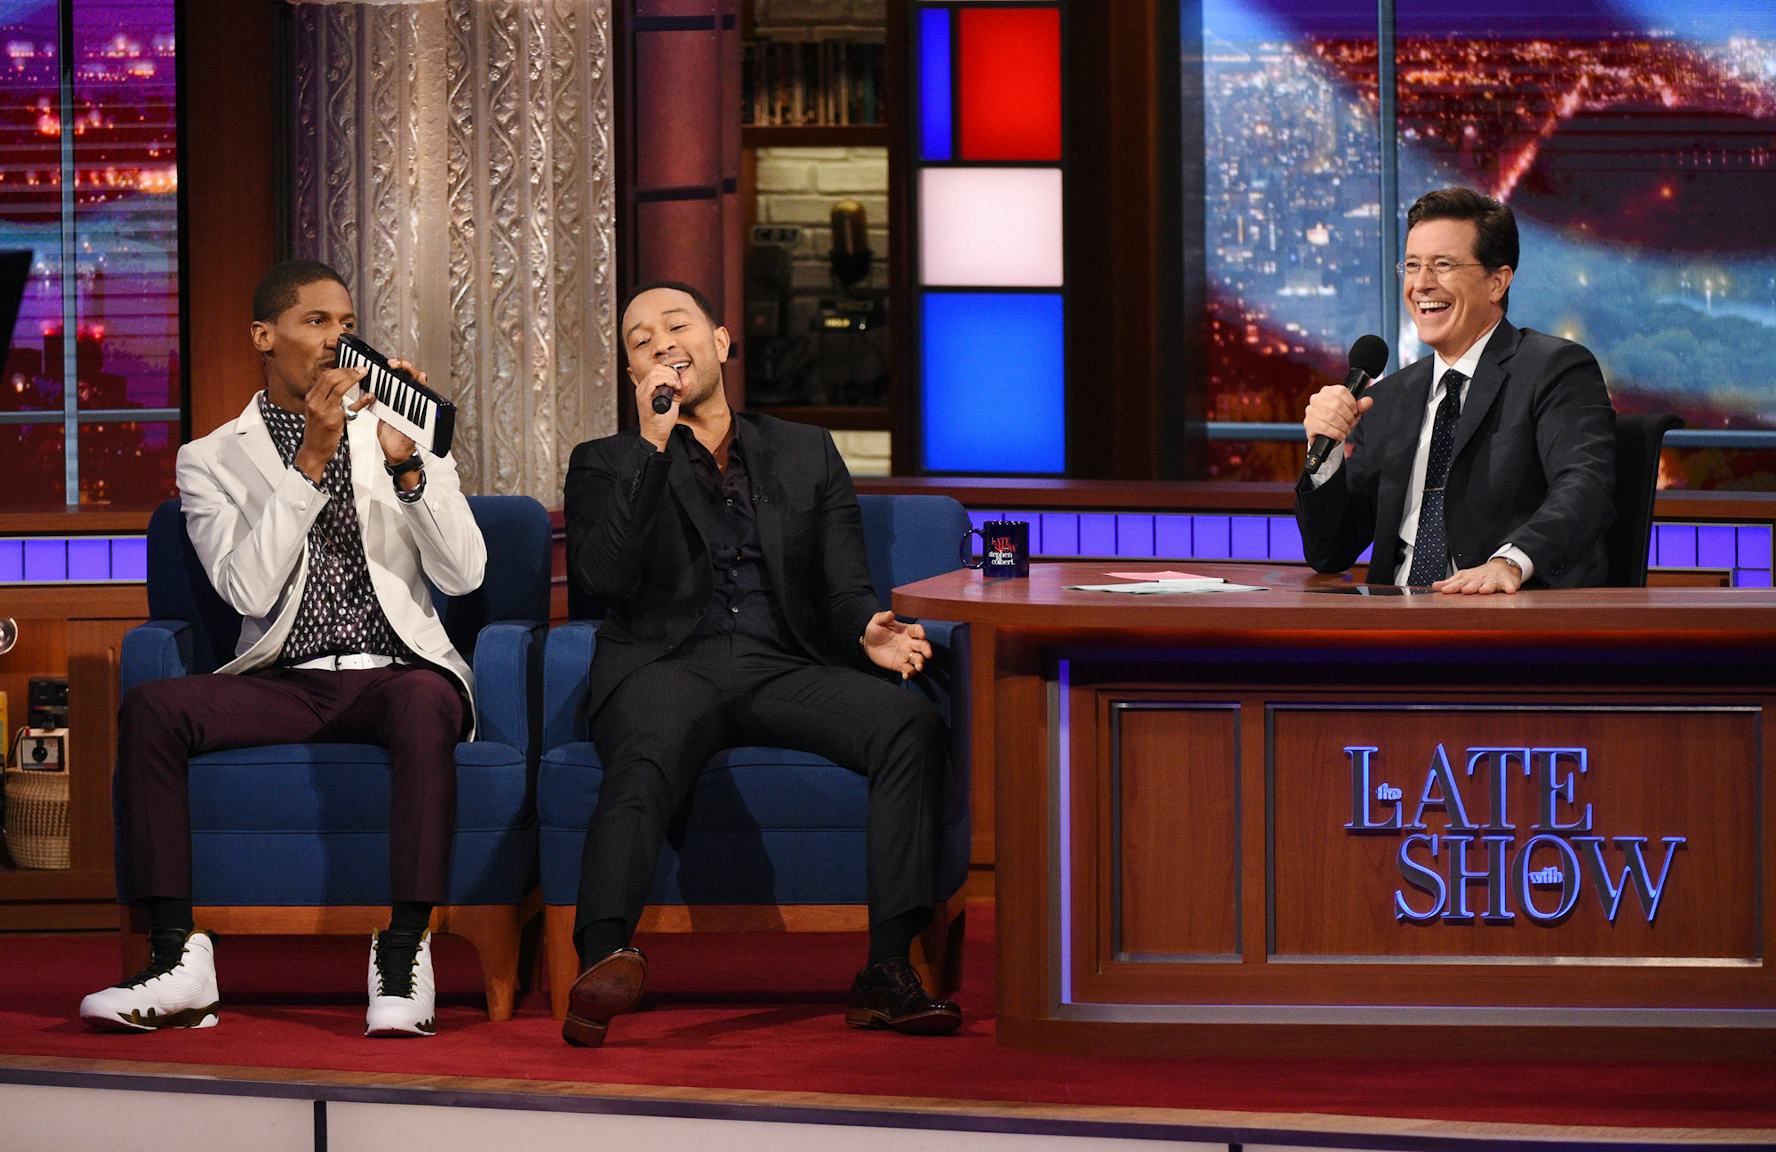 Stephen Colbert's 'Late Show' Has the Classiest Guests in Late Night